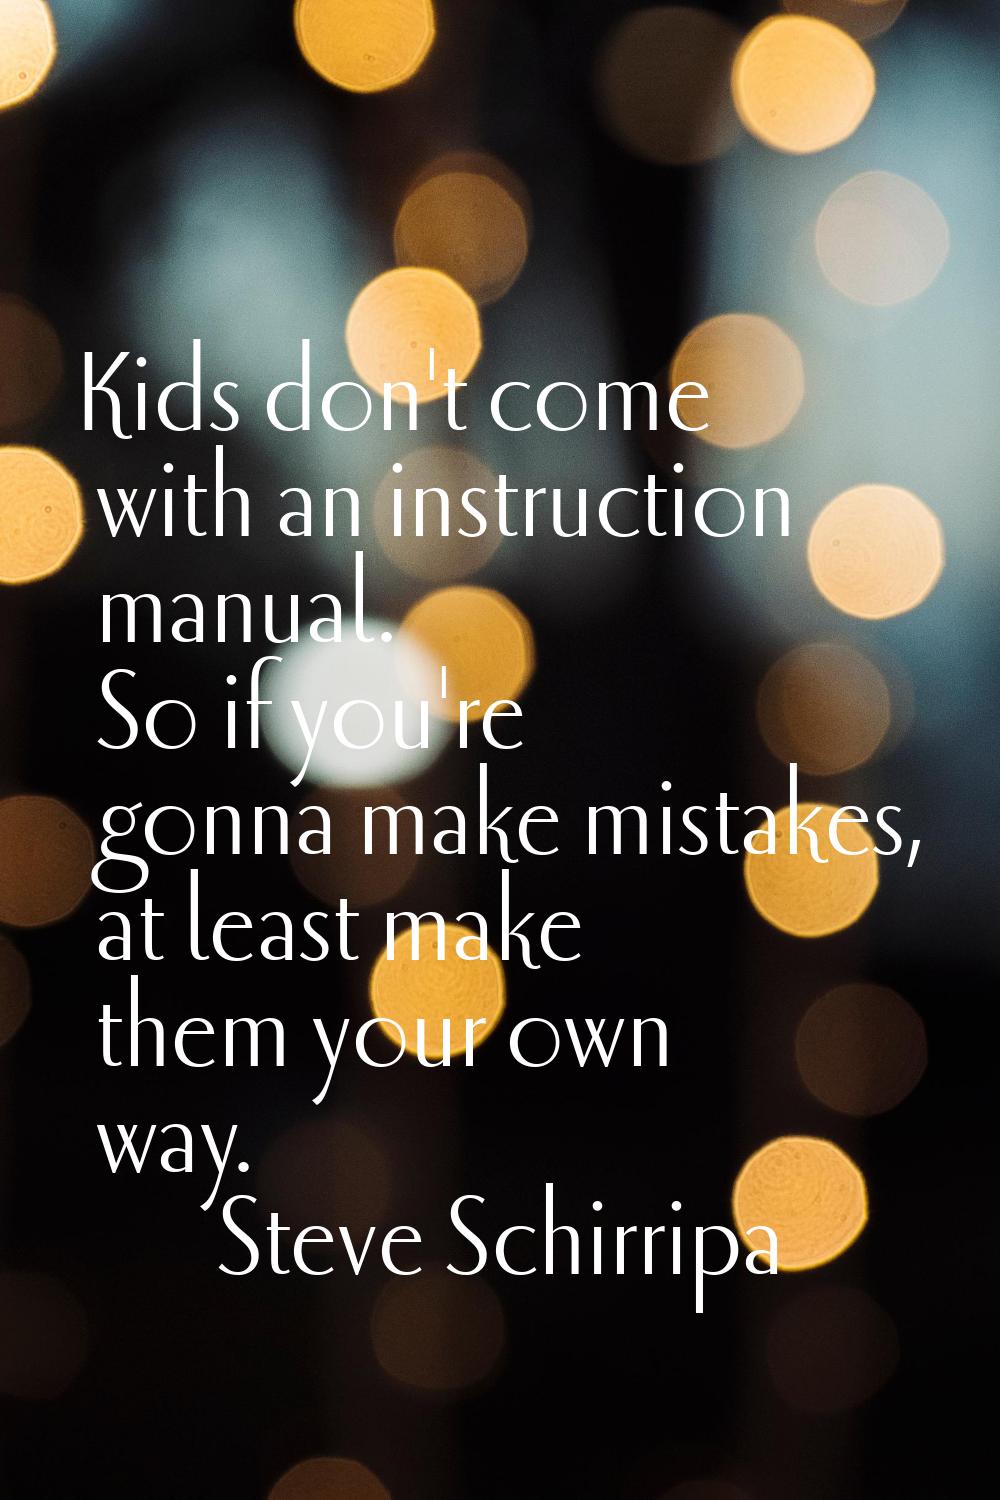 Kids don't come with an instruction manual. So if you're gonna make mistakes, at least make them yo